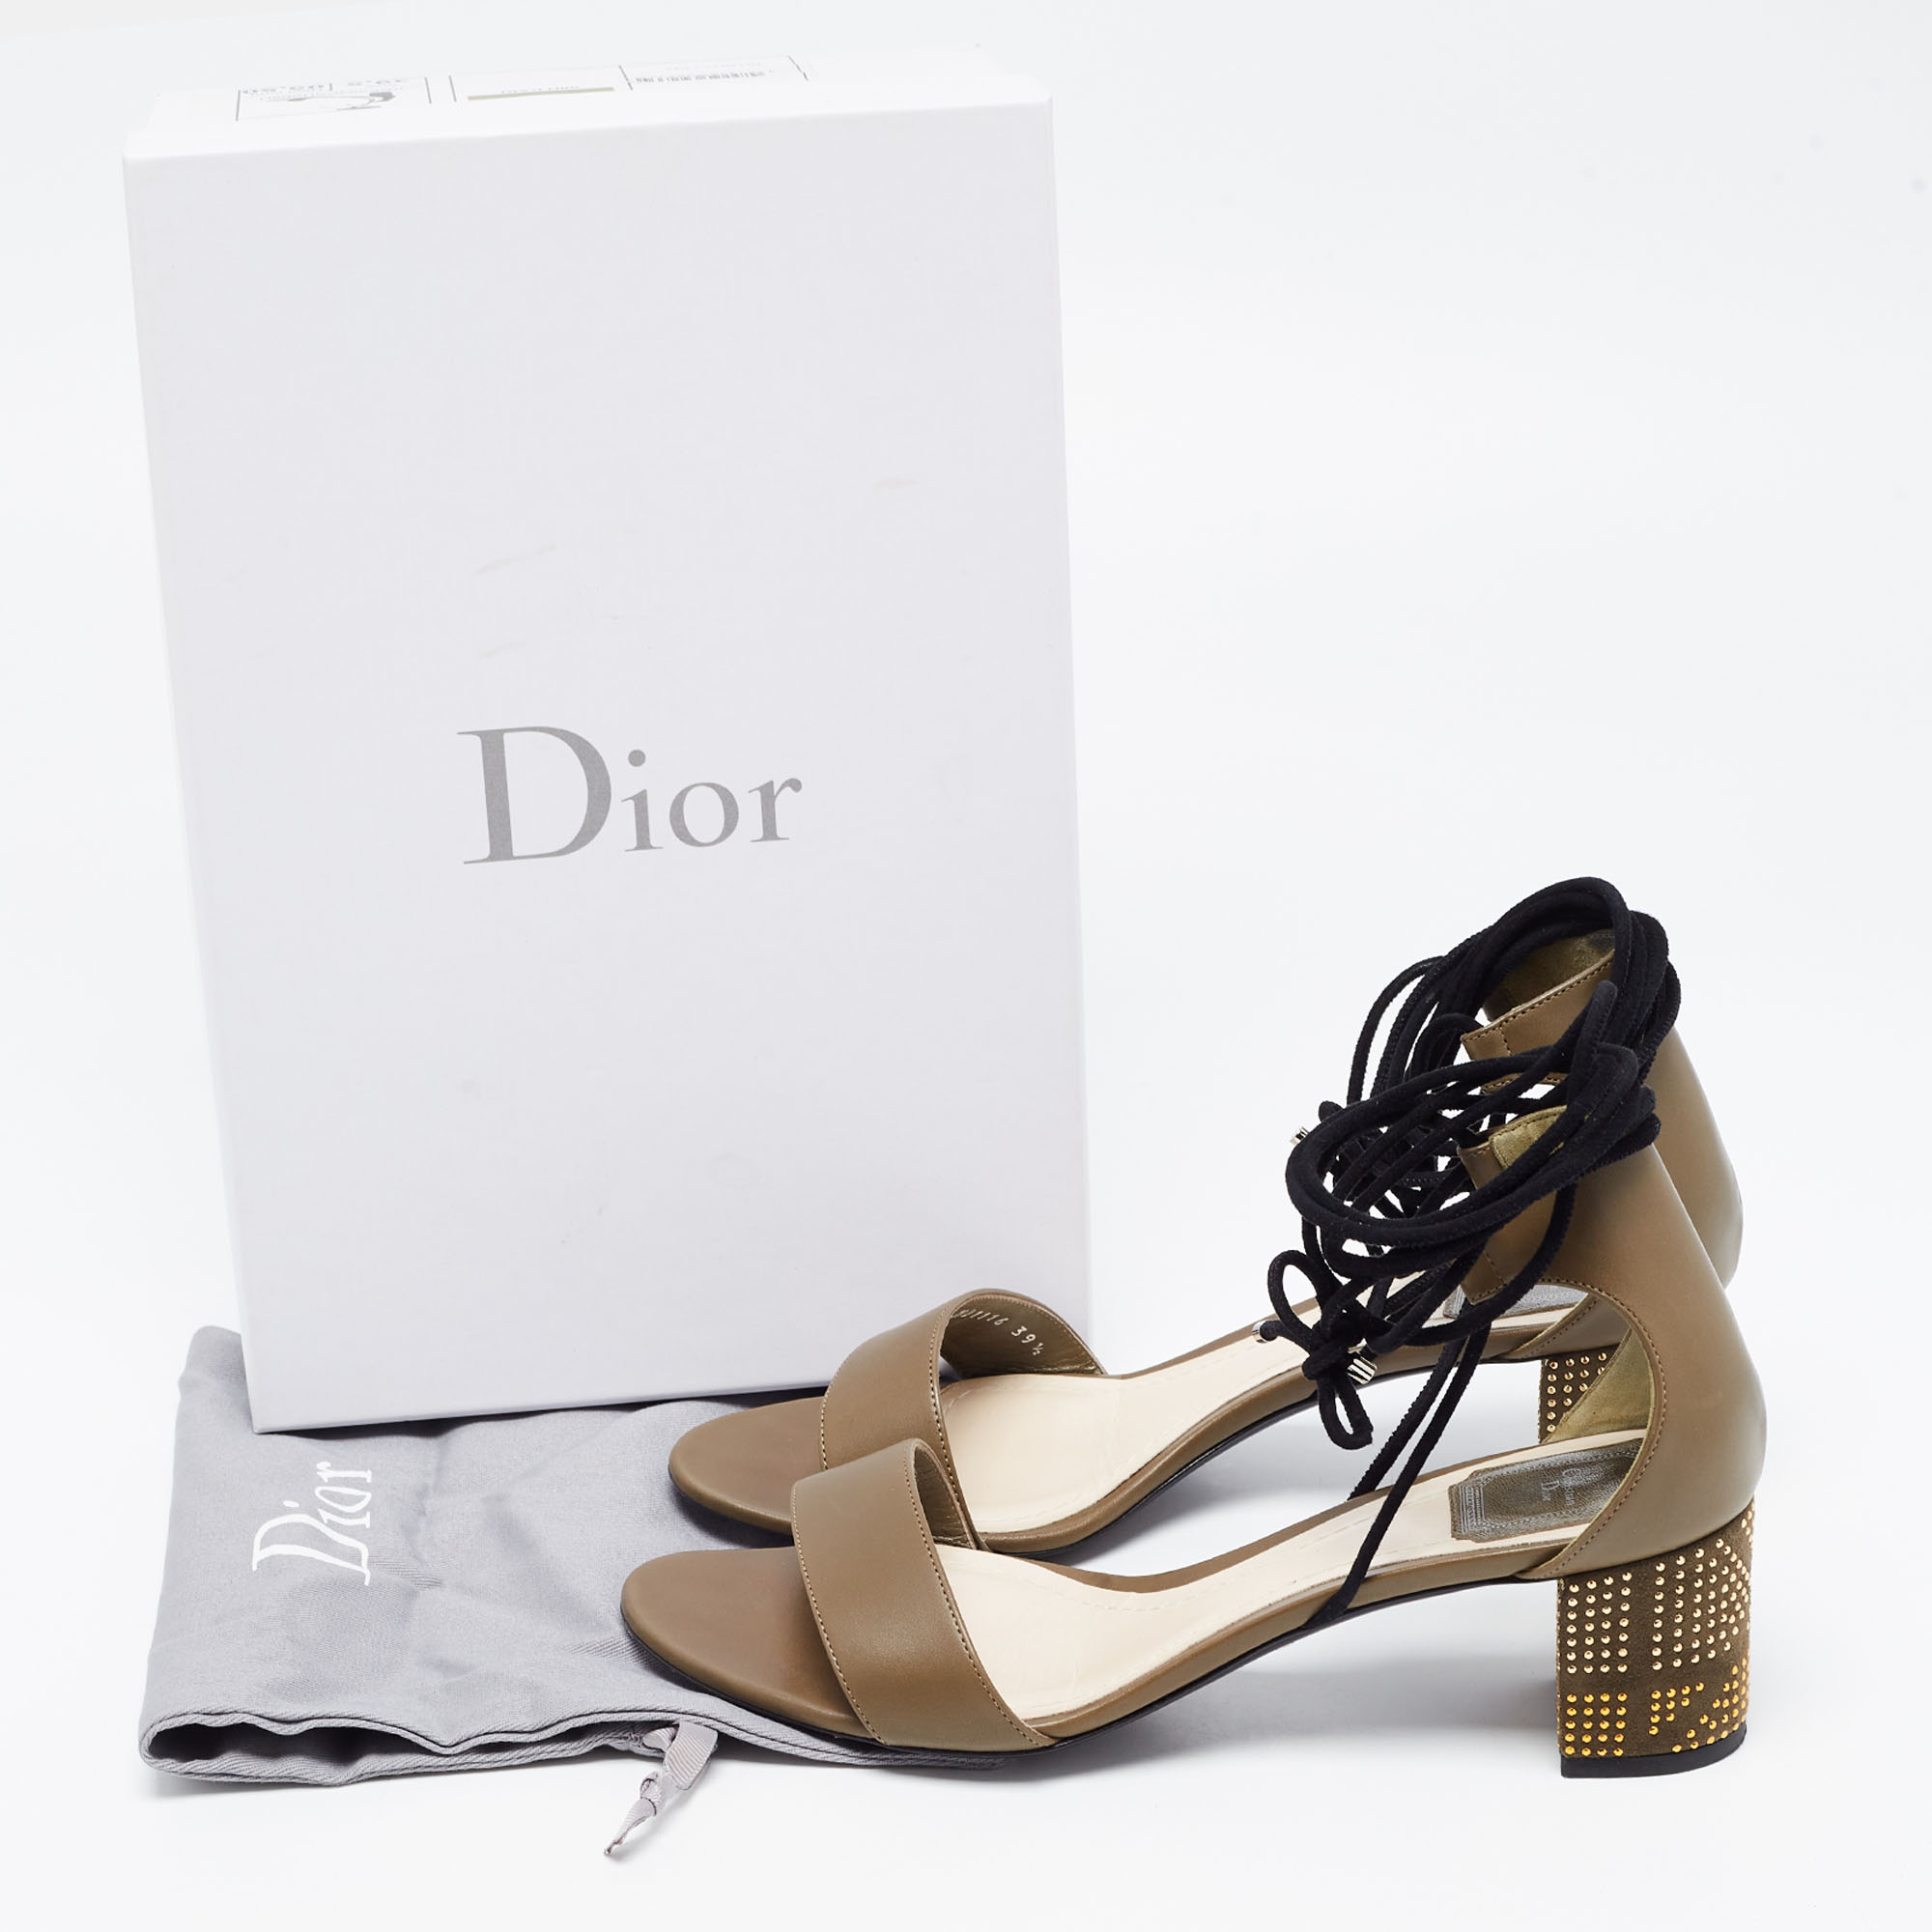 Dior Olive Green Leather Rainbow Stellar Block Heel Lace Up Sandals Size 39.5